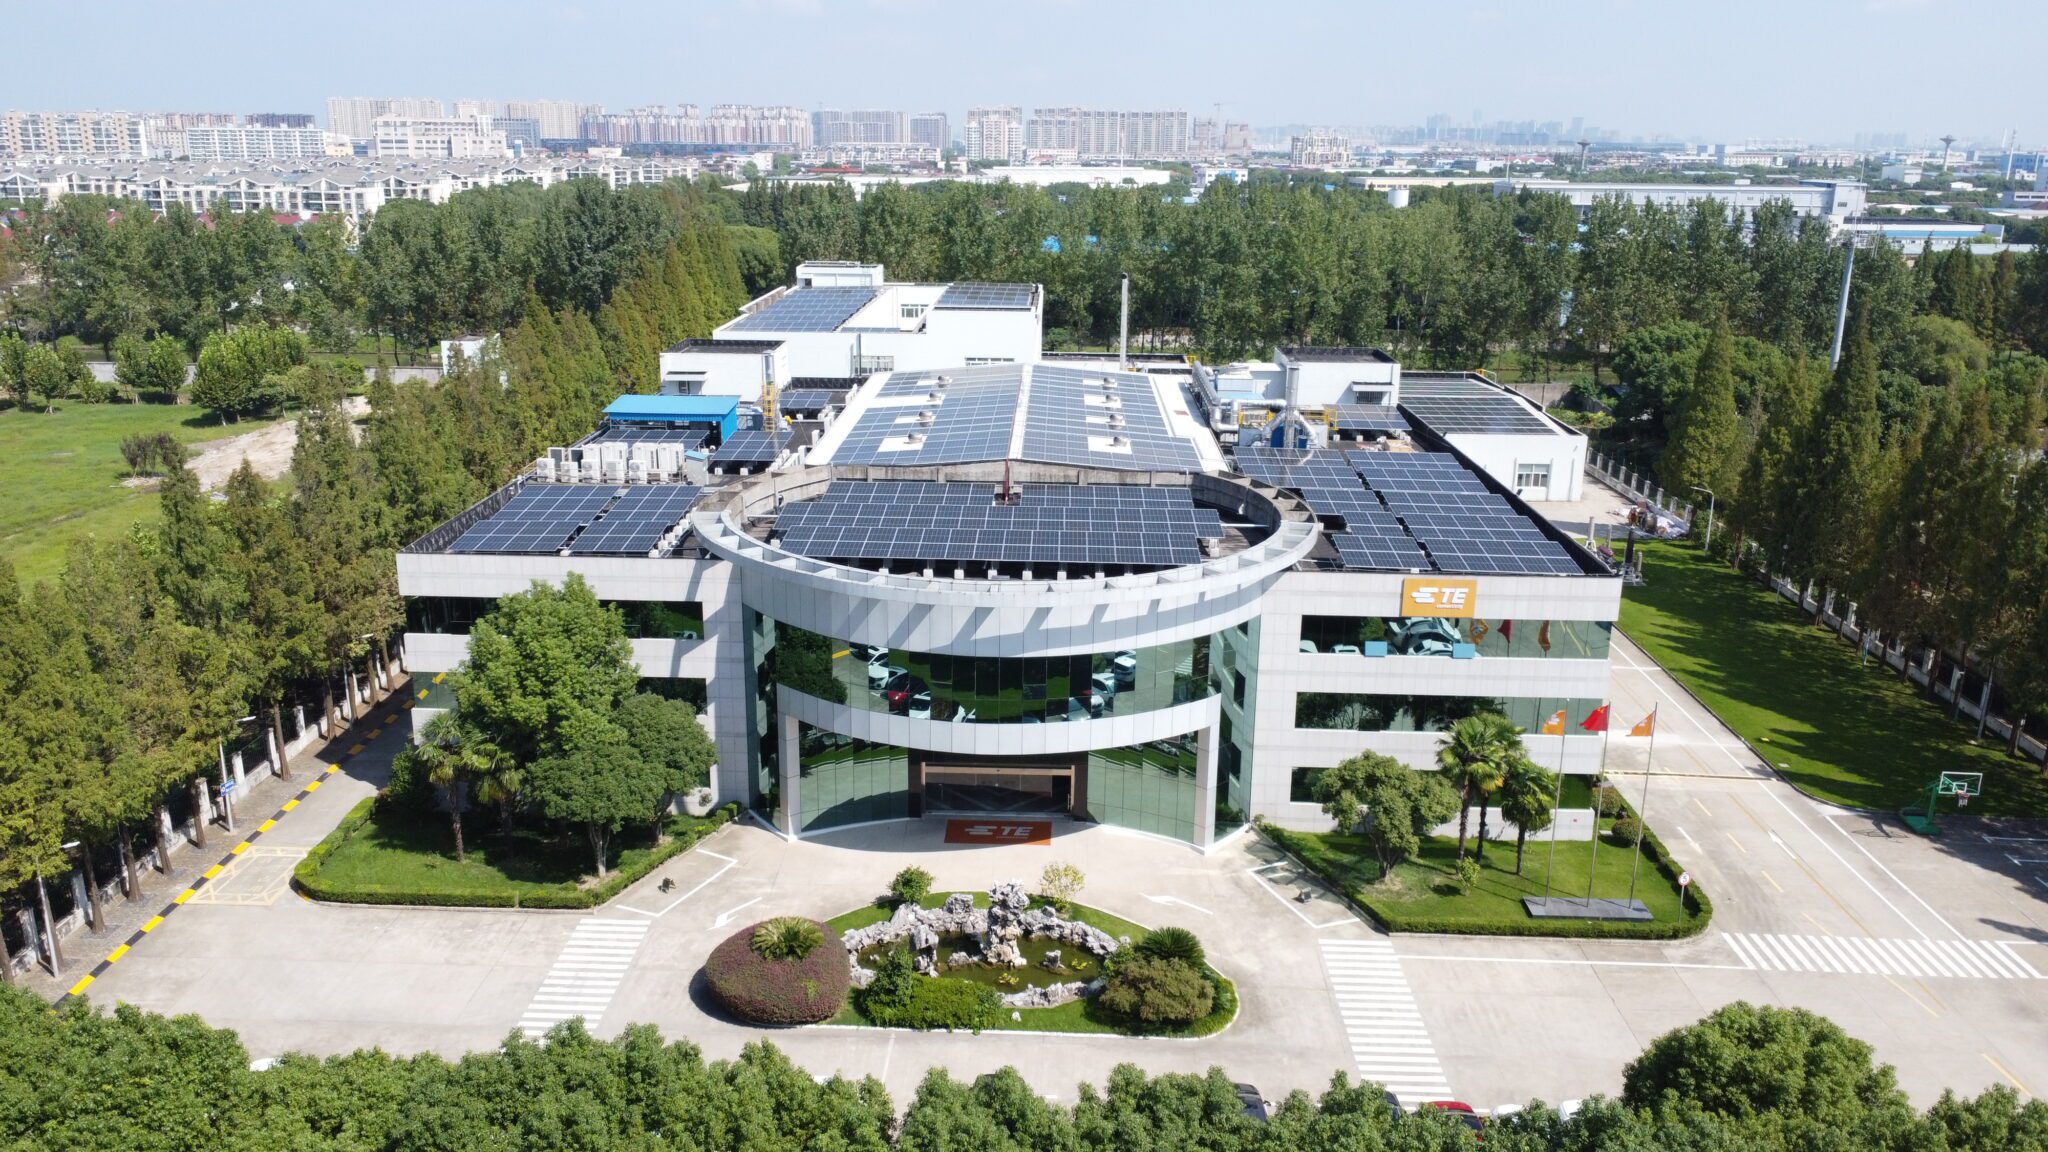 TE Energy Kunshan site launched a rooftop solar project in April 2023 and installed about 4,000 square meters of photovoltaic panels on the roof of the three buildings.